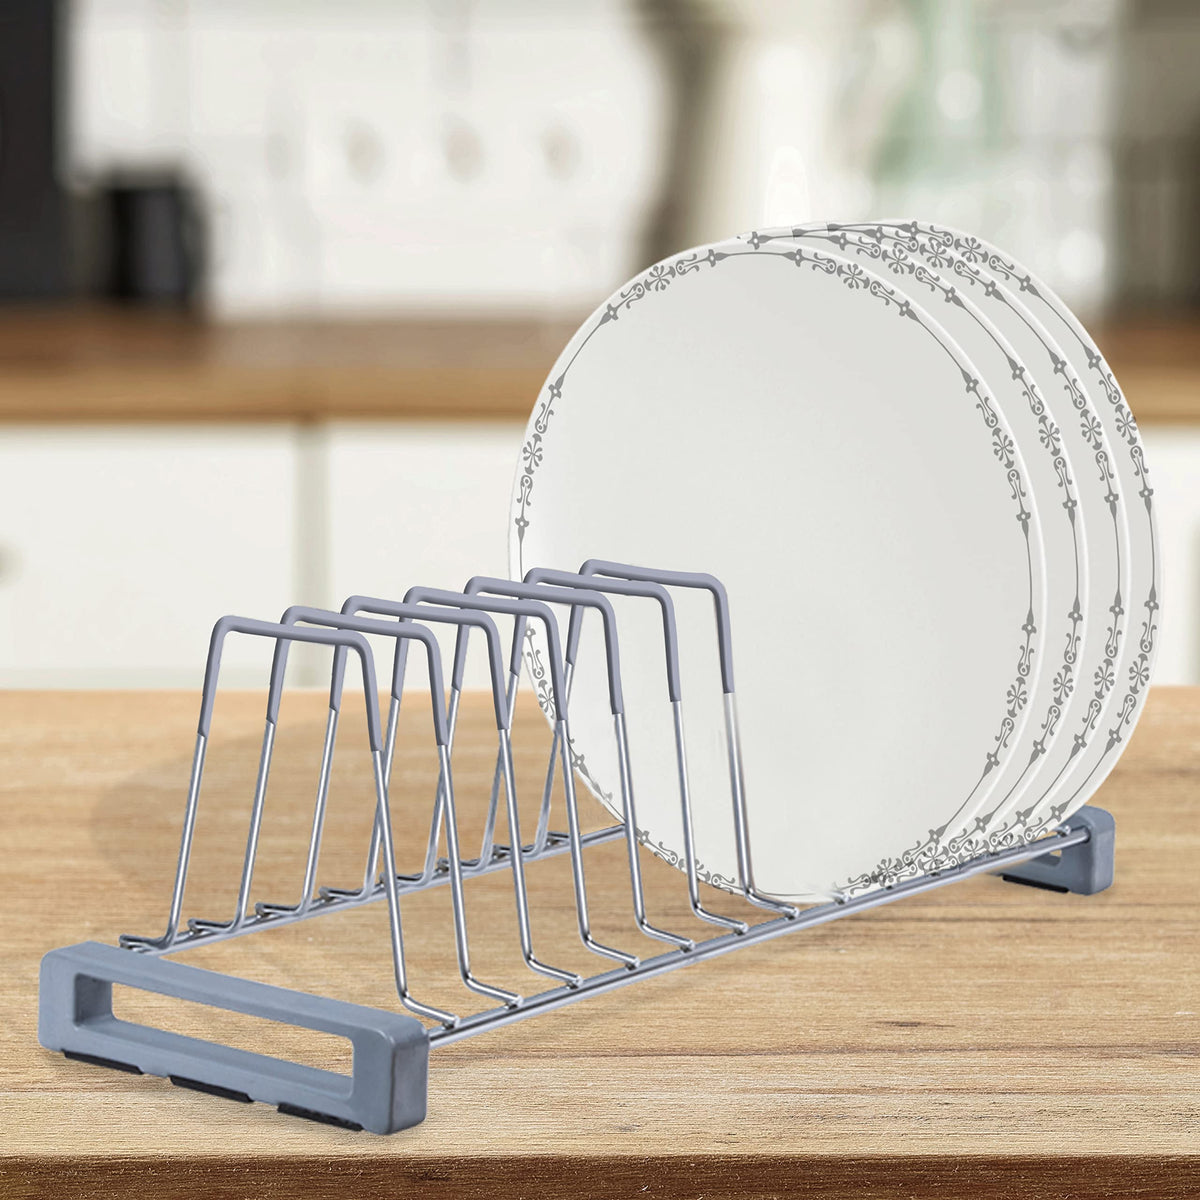 Plantex Stainless Steel Thali Stand/Dish Rack/Plate Stand/Plate Rack/Modular Kitchen Rack/Saucer Stand/Tandem Box Accessories (Chrome)